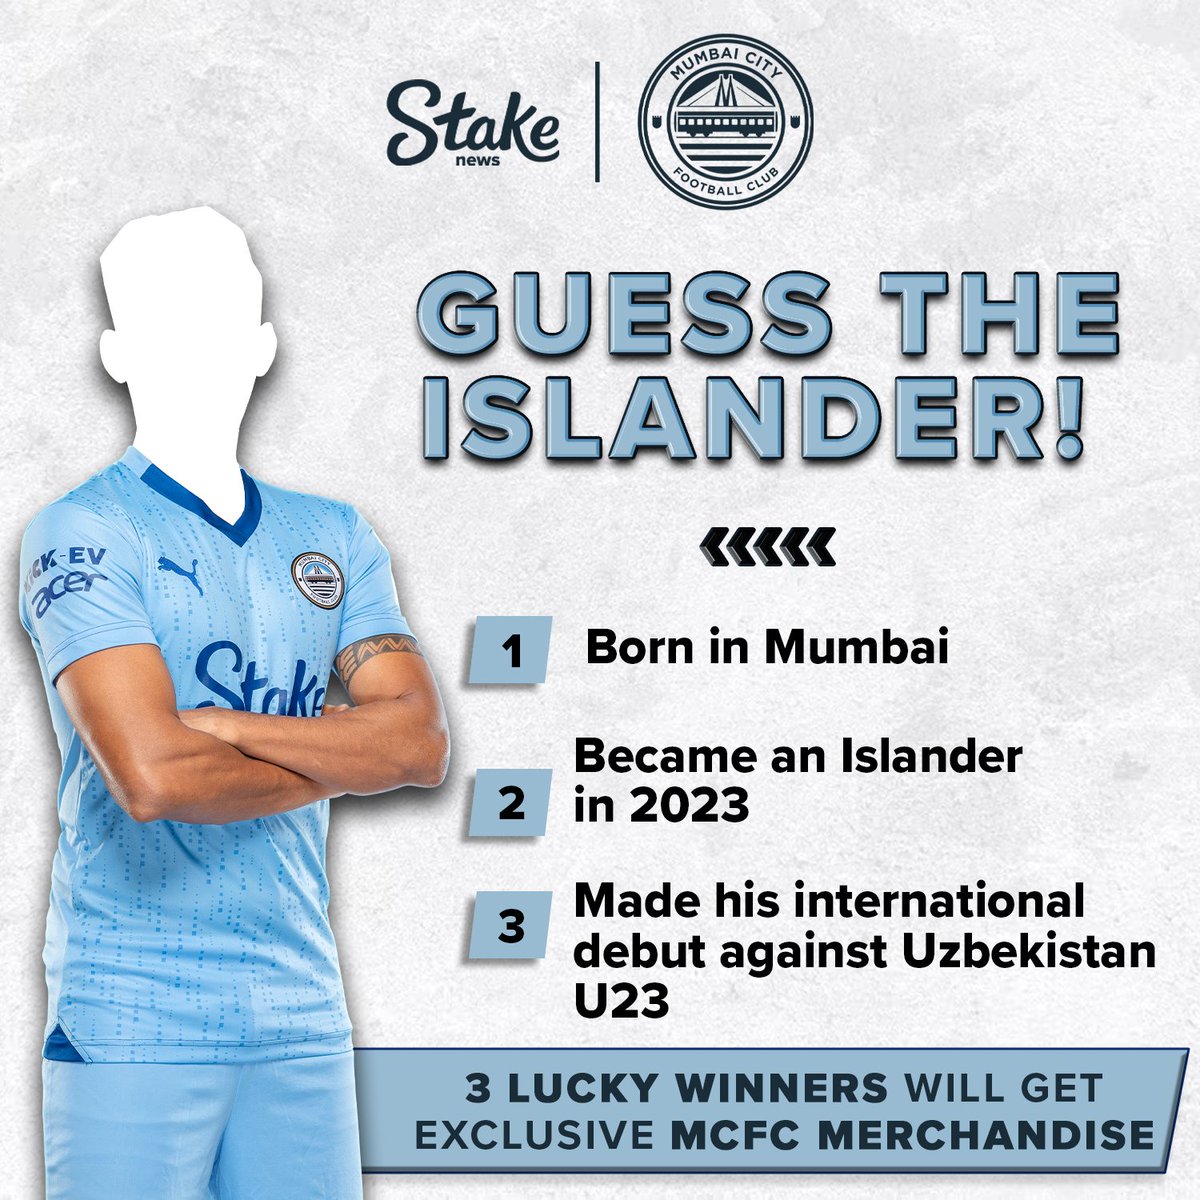 As #MCFC flies to #Kolkata for the highly anticipated #ISLFinal, here's your chance to win some exclusive merchandise 👕 All you need to do is 𝑮𝒖𝒆𝒔𝒔 𝑻𝒉𝒆 𝑰𝒔𝒍𝒂𝒏𝒅𝒆𝒓 and follow @stakenewsindia 🩵 Contest closes on Friday, 03rd May #MBSGMCFC #AamchiCity…